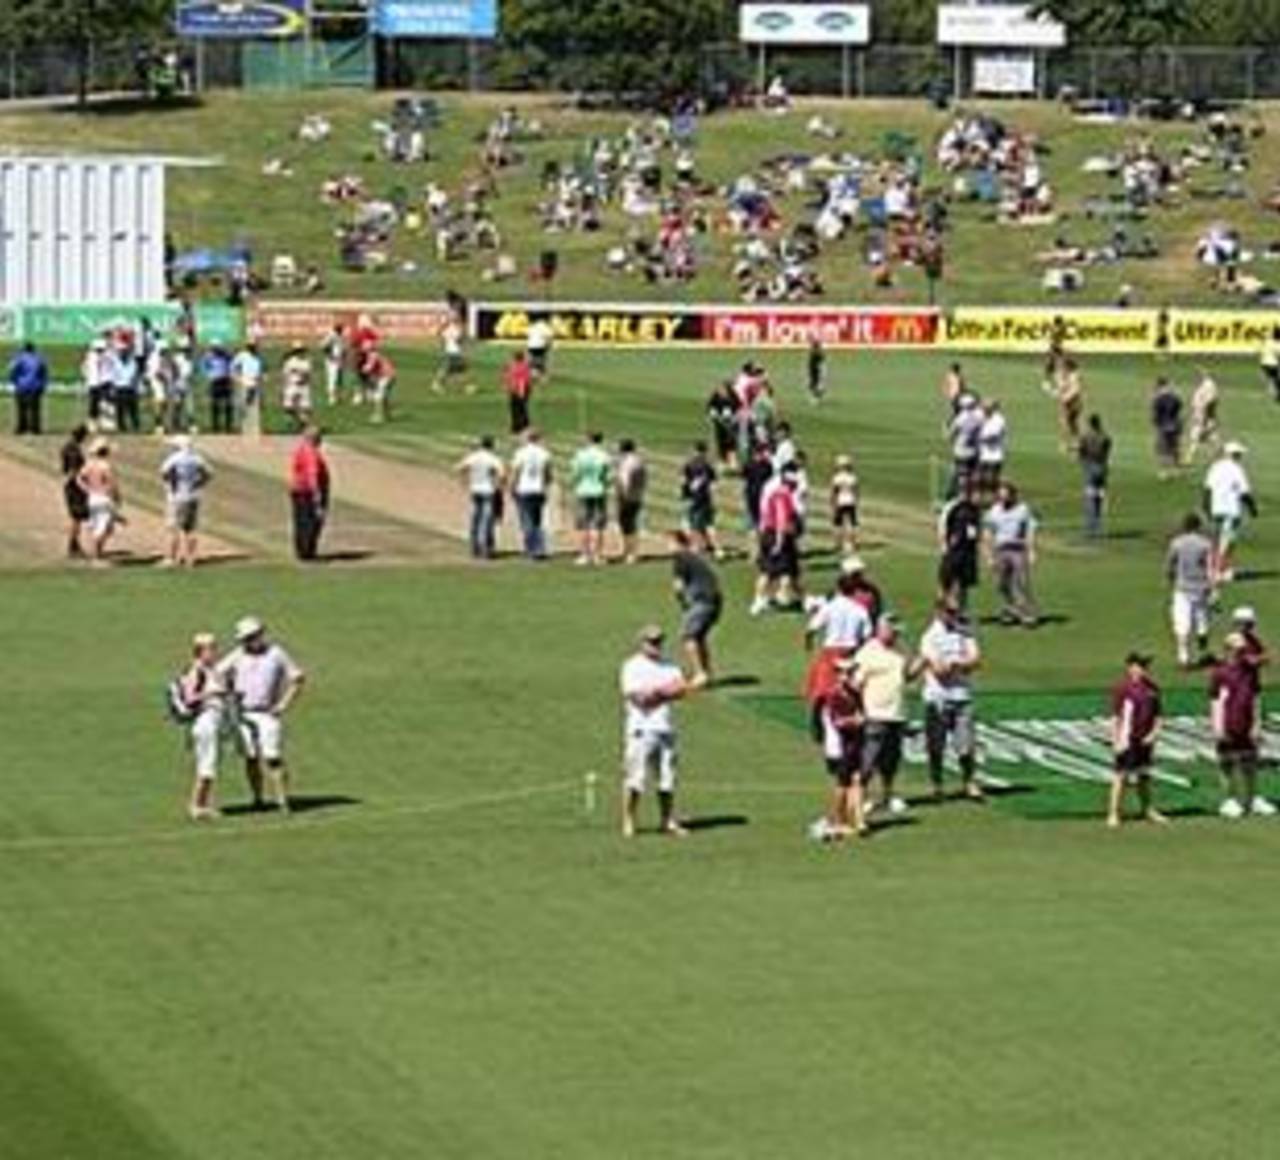 Lunch in Hamilton and time for a pitch invasion of a more genteel kind&nbsp;&nbsp;&bull;&nbsp;&nbsp;ESPNcricinfo Ltd